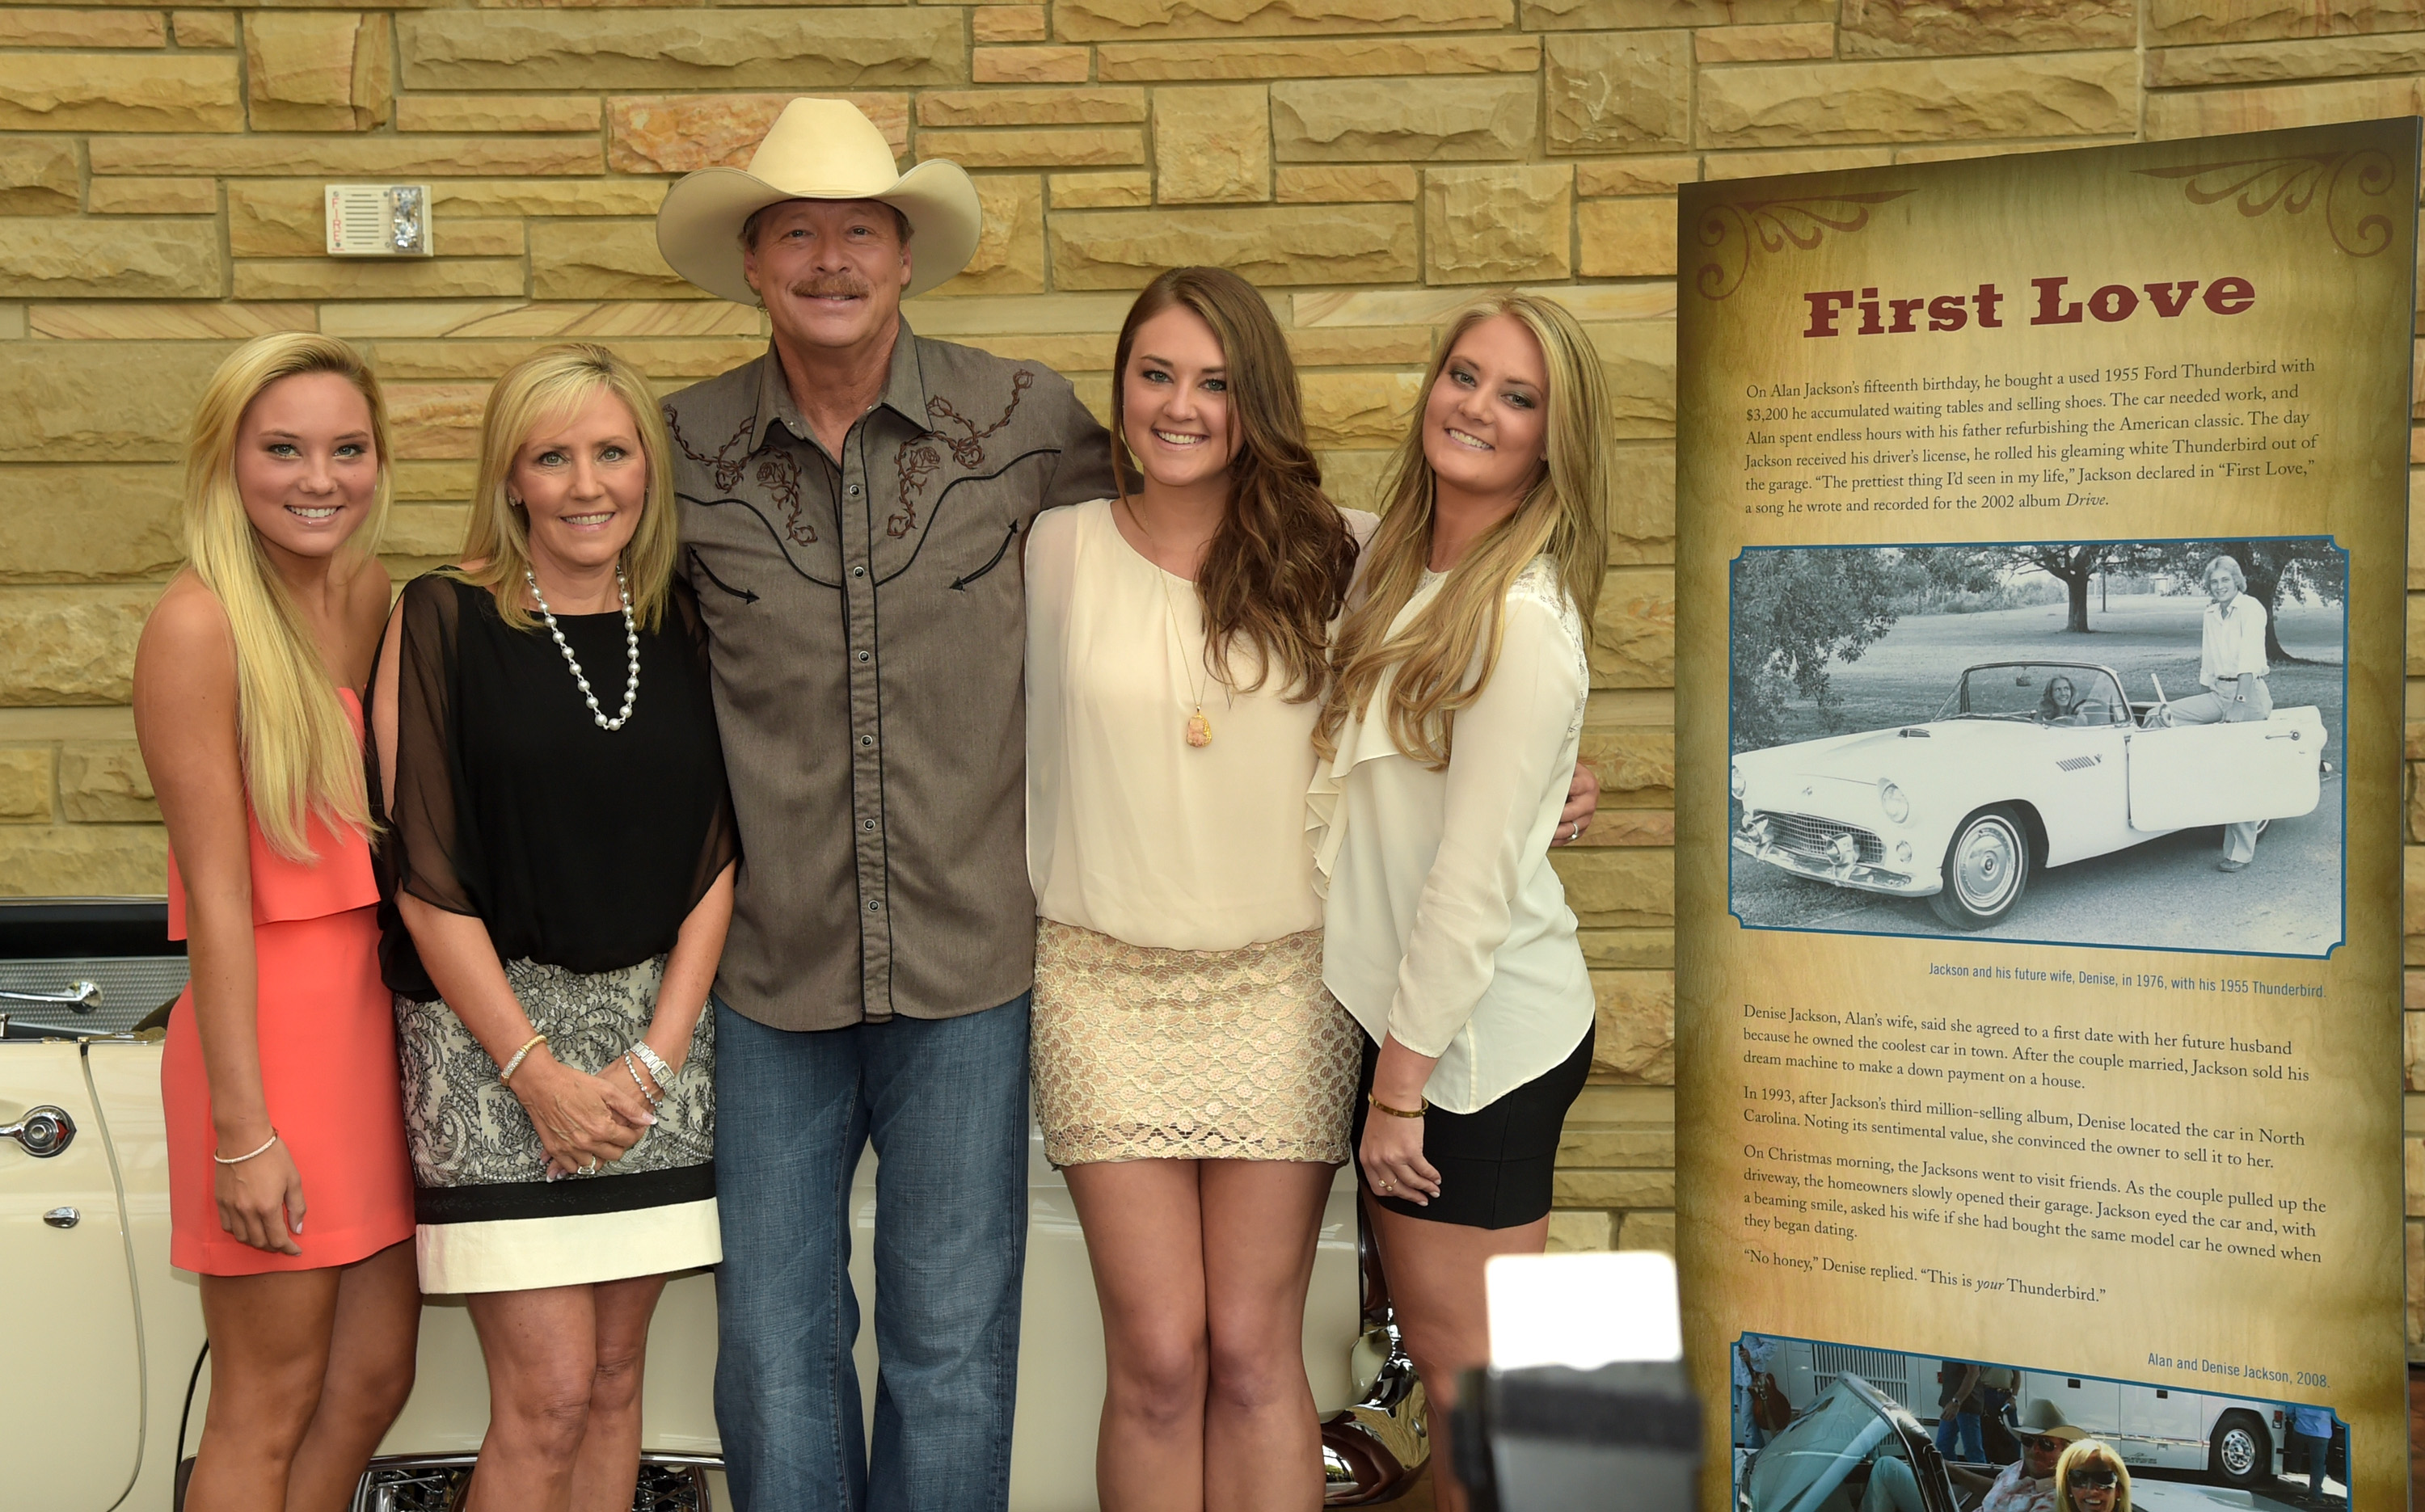 Dani Grace, Denise, Alan, Alexandra Jane "Ali," and Mattie Denise Jackson at the opening of "Alan Jackson: 25 Years of Keepin' It Country" exhibit on August 27, 2014, in Nashville | Source: Getty Images